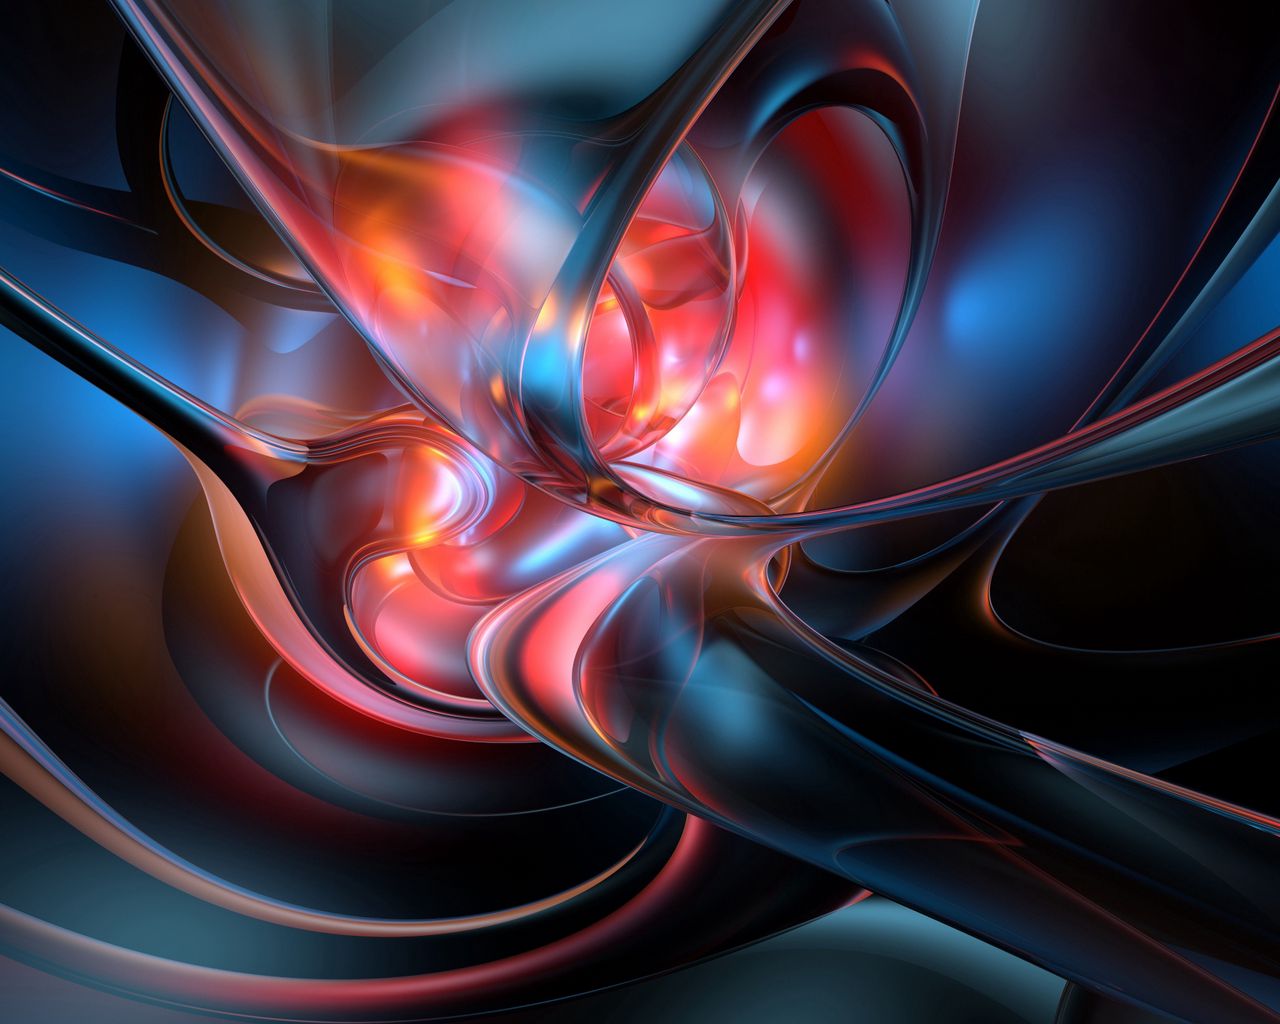 Download wallpaper 1280x1024 abstract, blue, red, spiral standard 5:4 hd  background